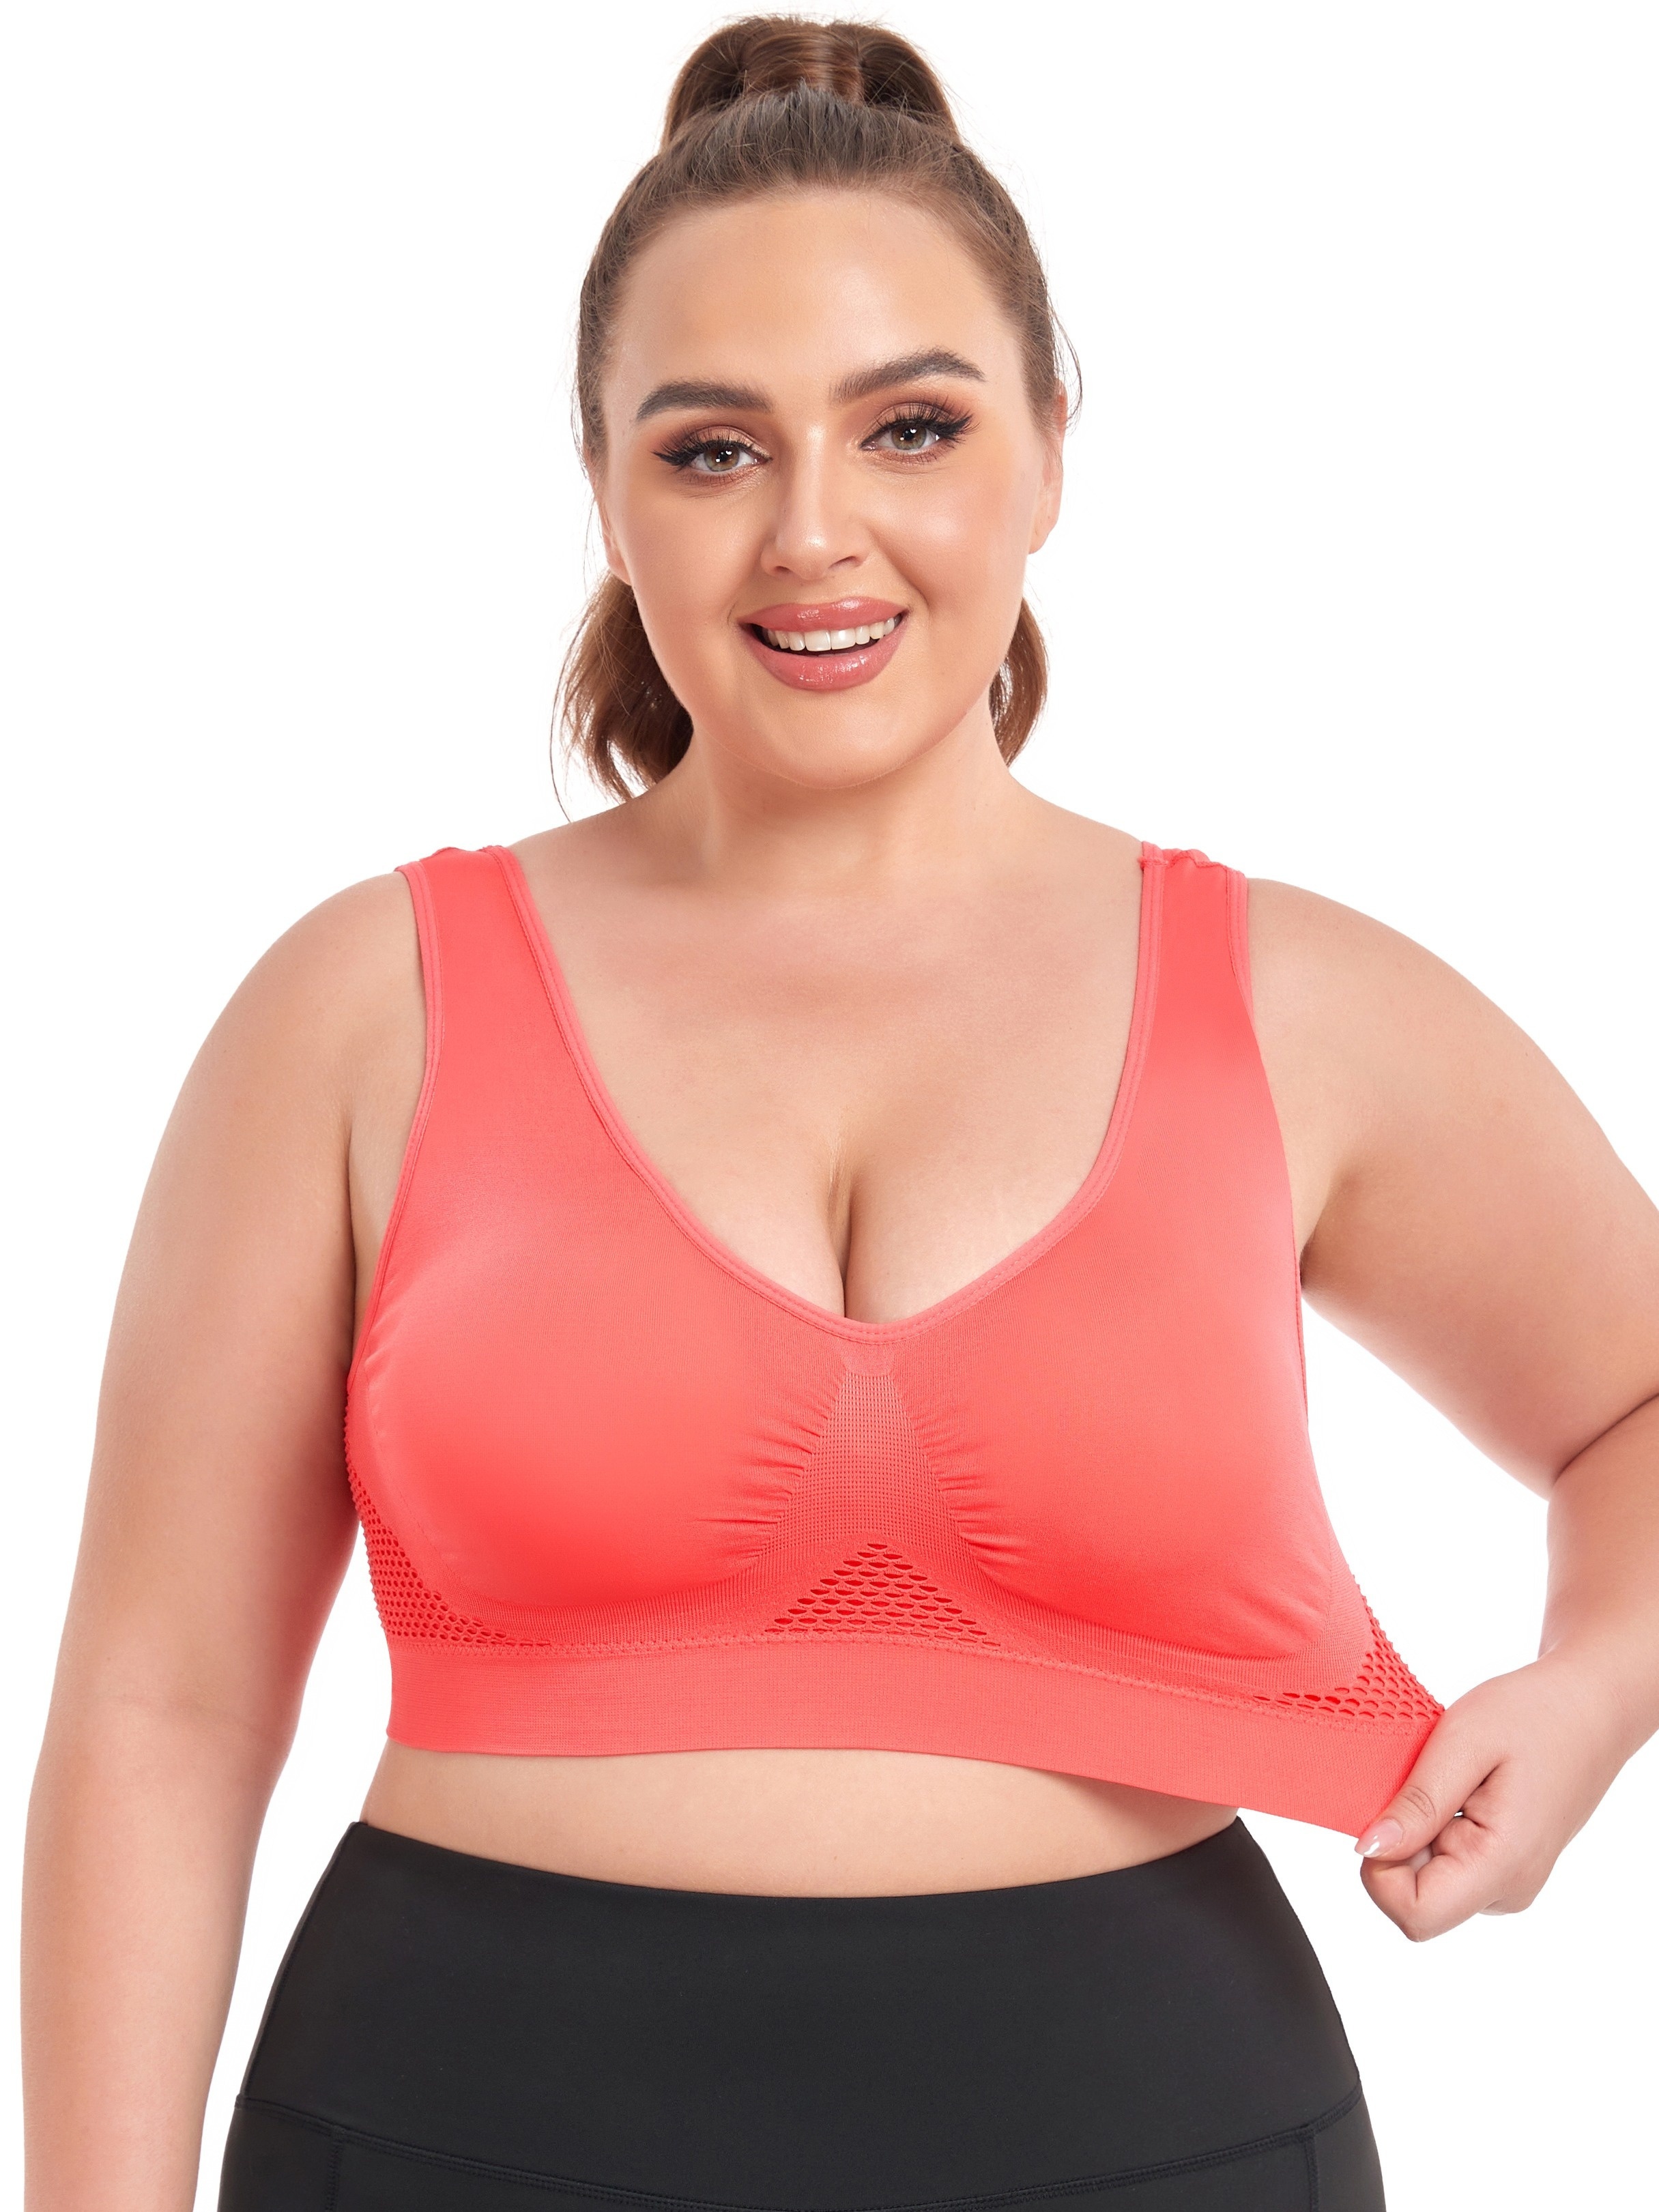 Push Up Bras for Women No Underwire Padded Comfort Bras Small to Plus Size  Everyday Wear 2XL Watermelon Red